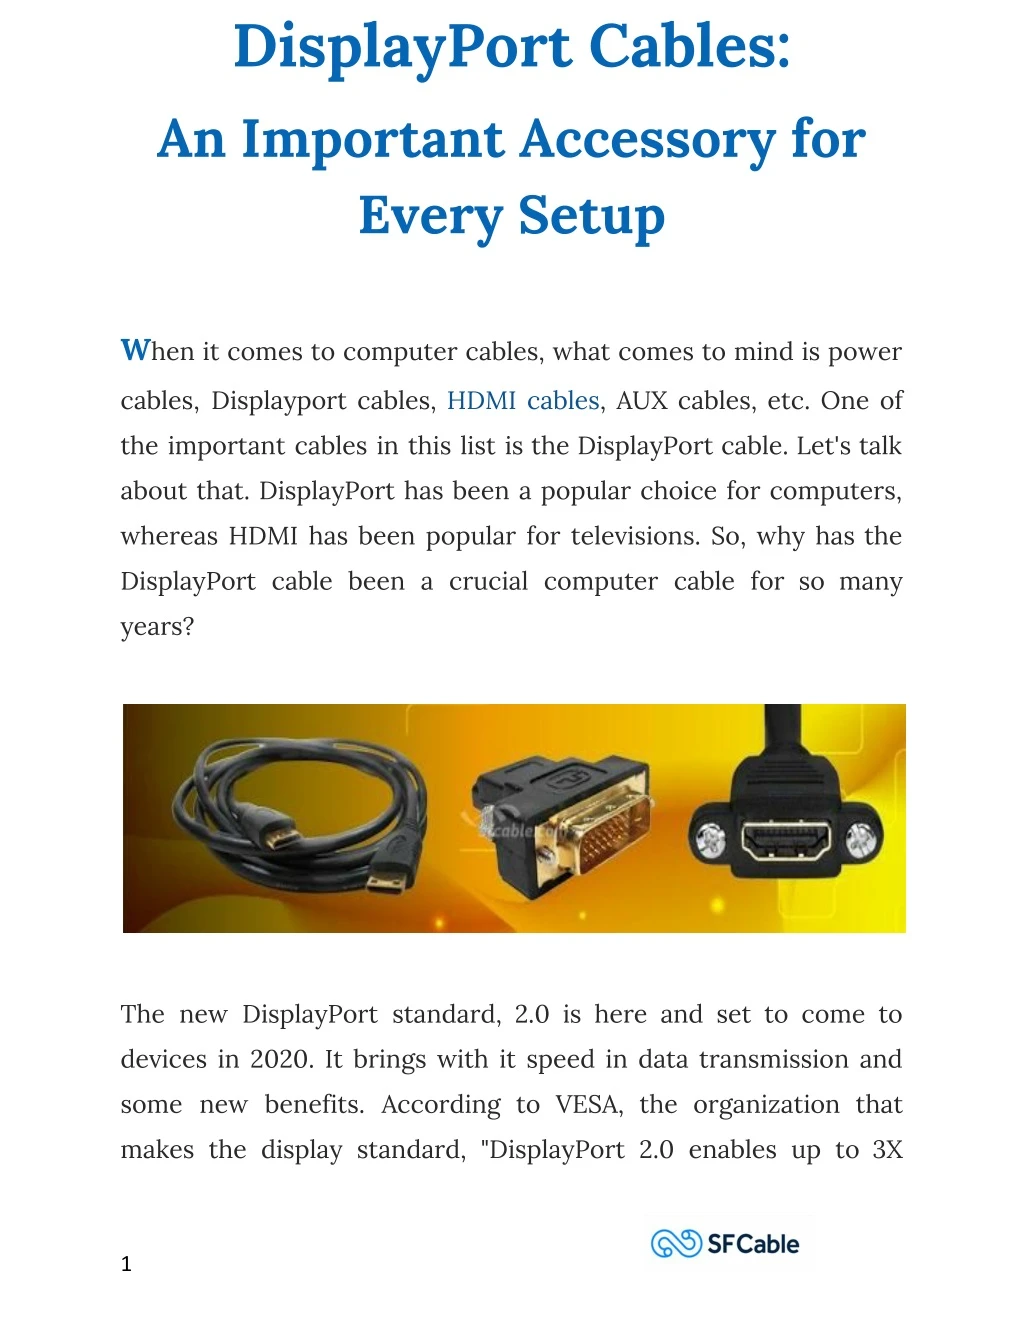 displayport cables an important accessory